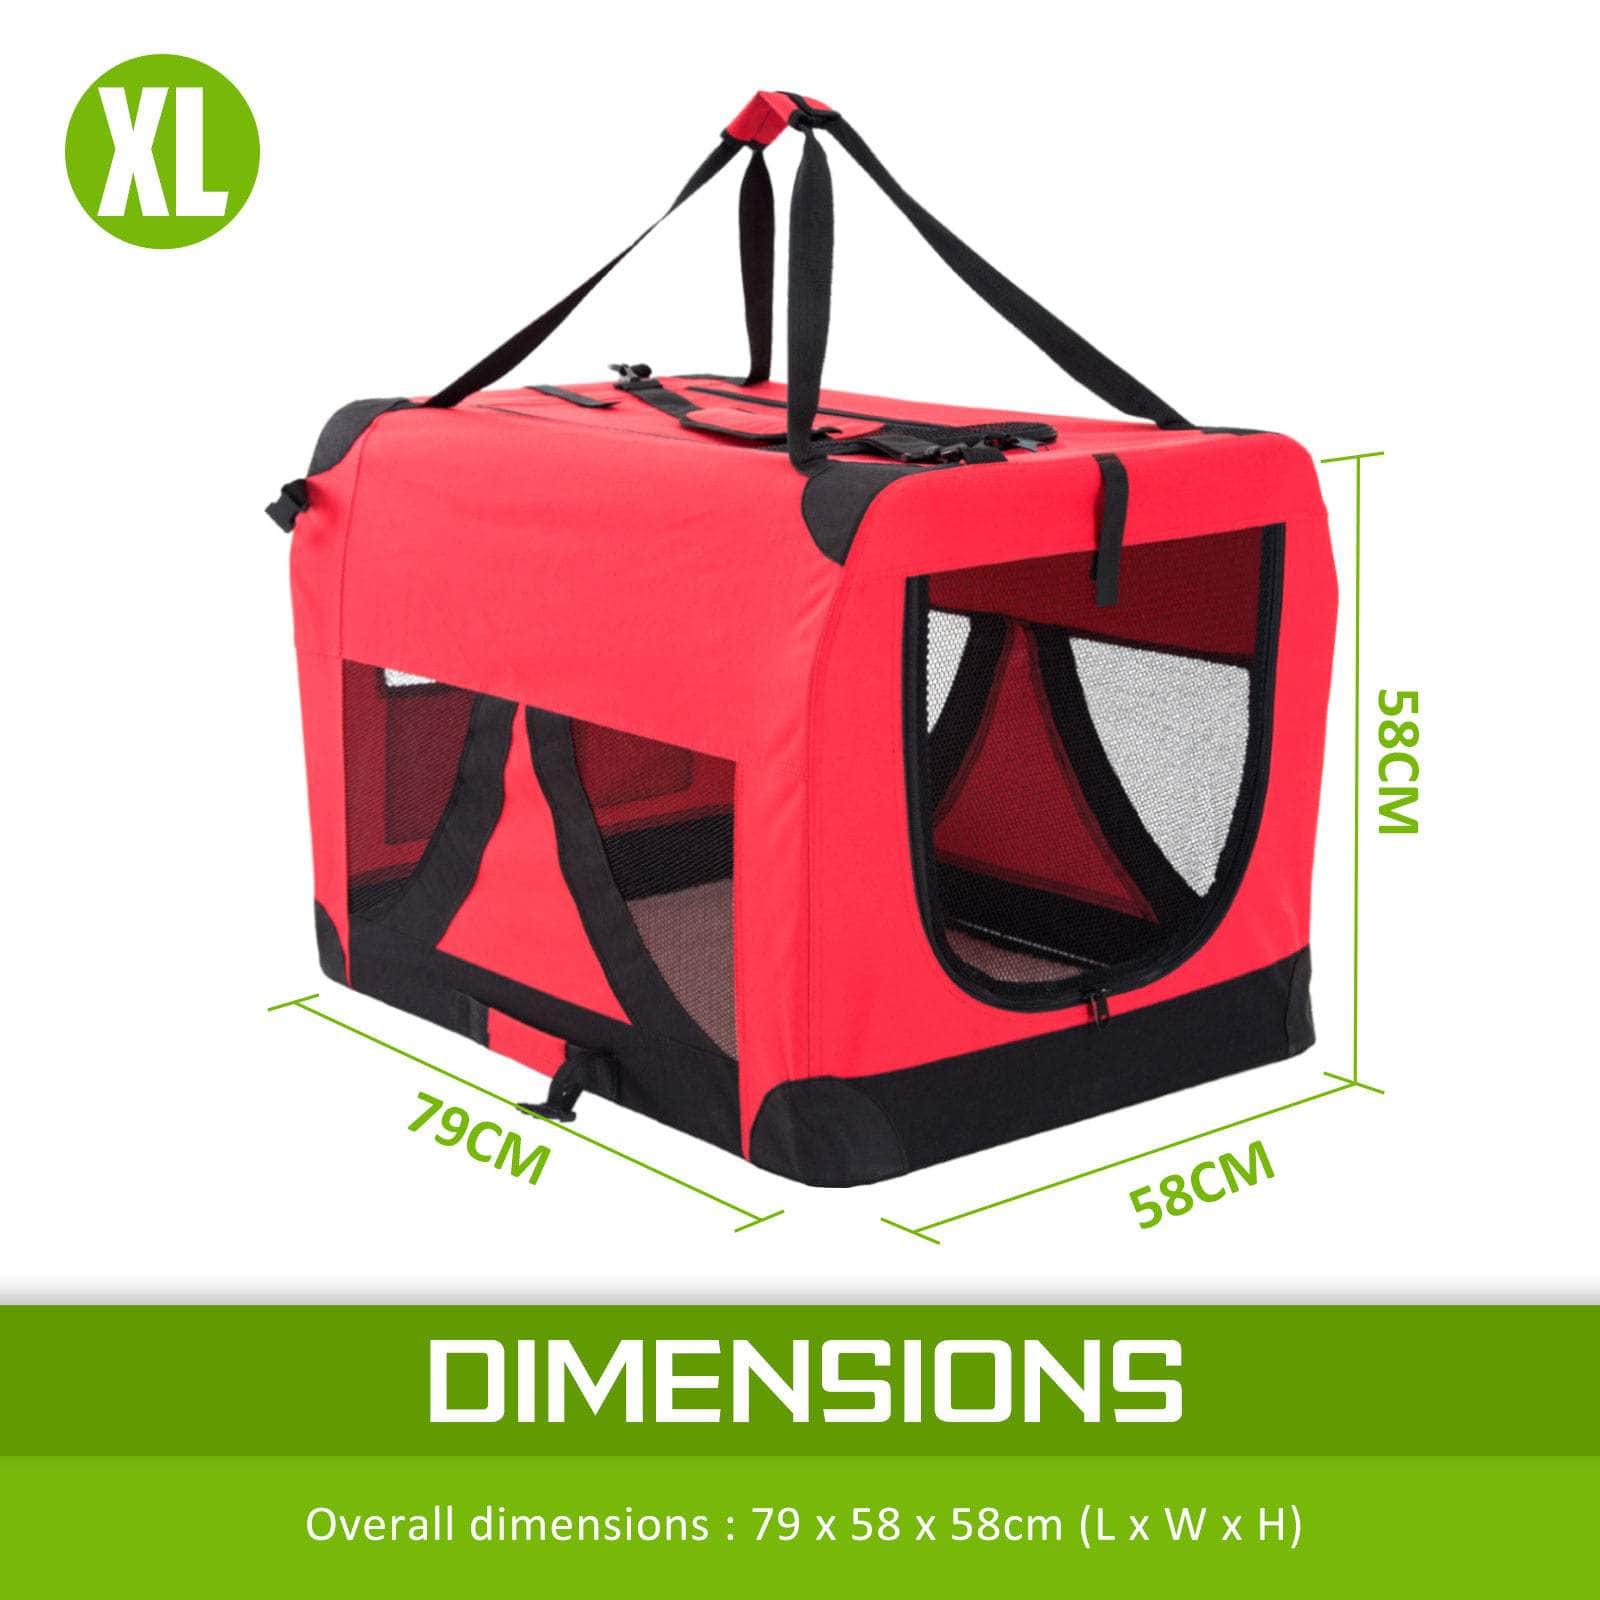 Red Portable Soft Dog Cage Crate Carrier Xl